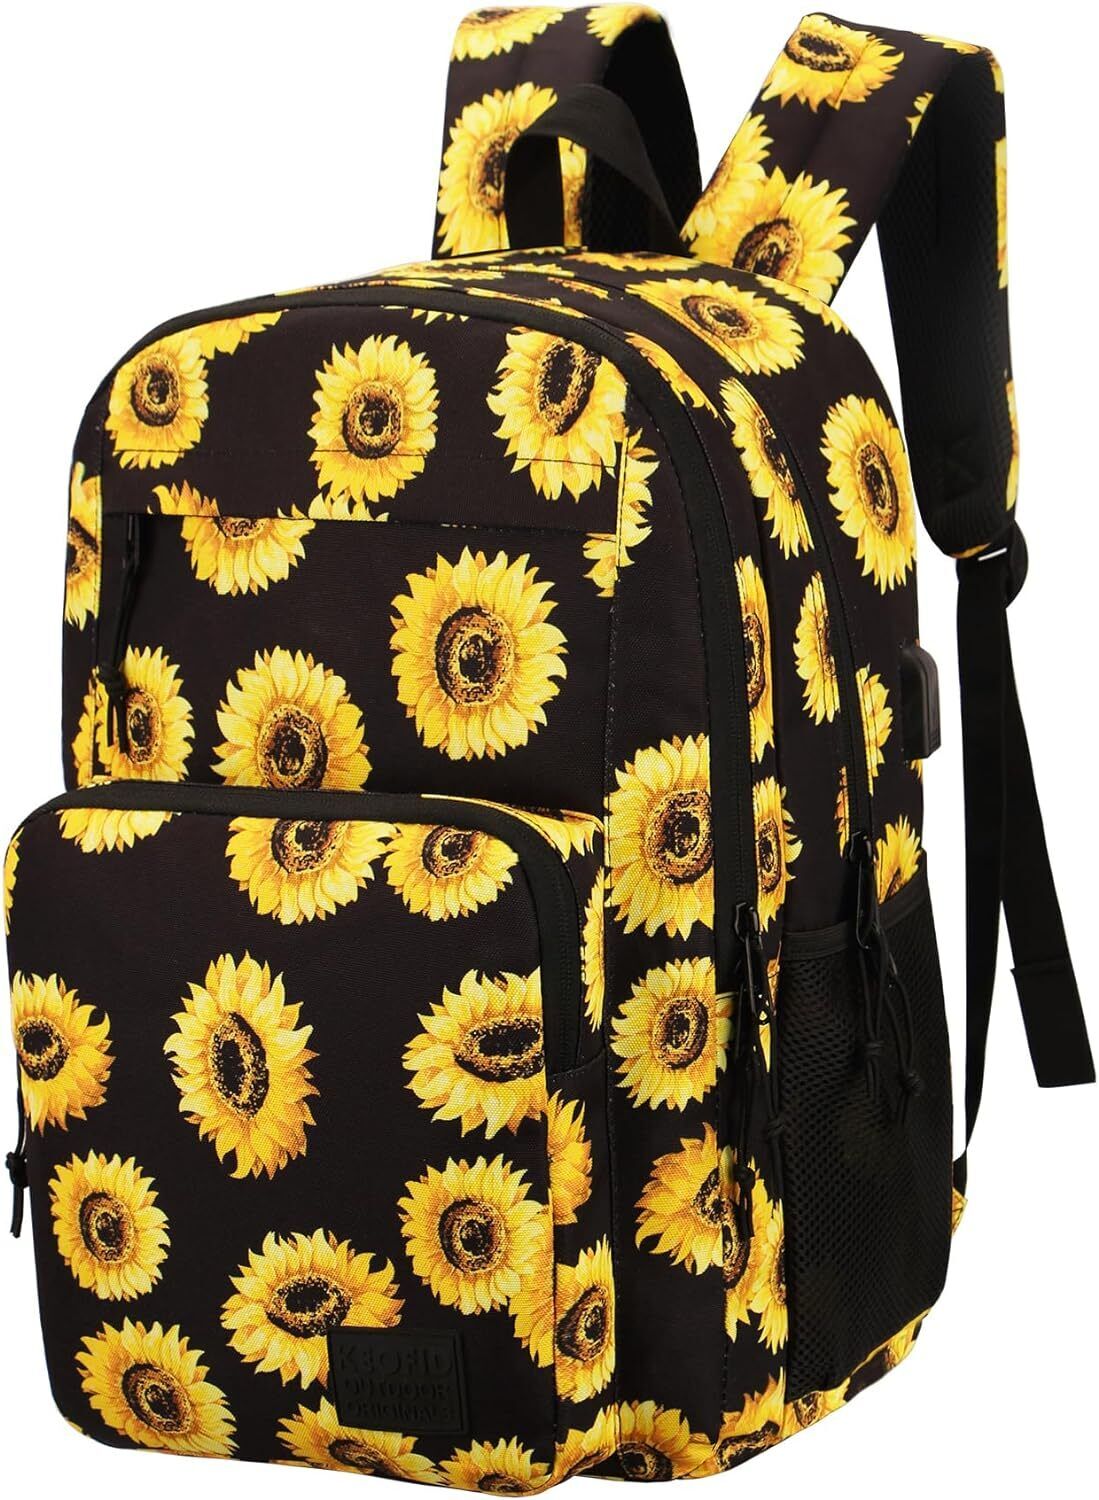 KEOFID classic carry-on travel backpack for men and 17.3Inches, Sunflower 